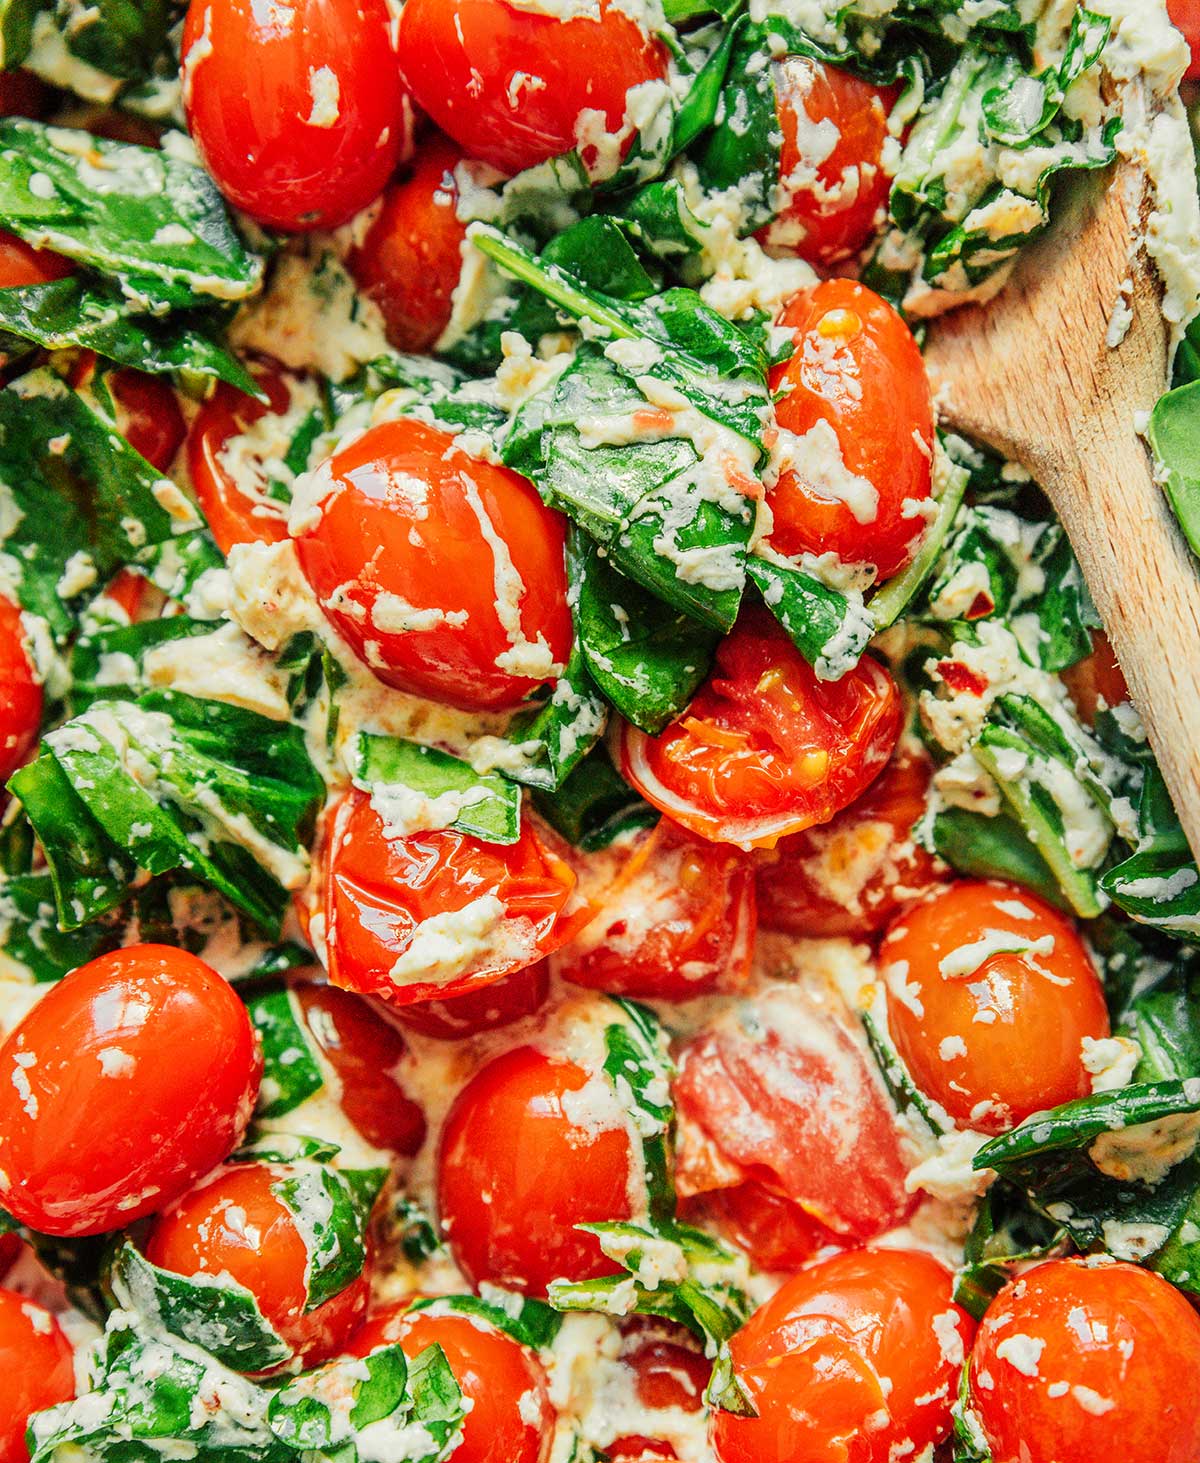 A close-up view detailing the texture and creaminess of the stirred tomato, cheese, and spinach mixture